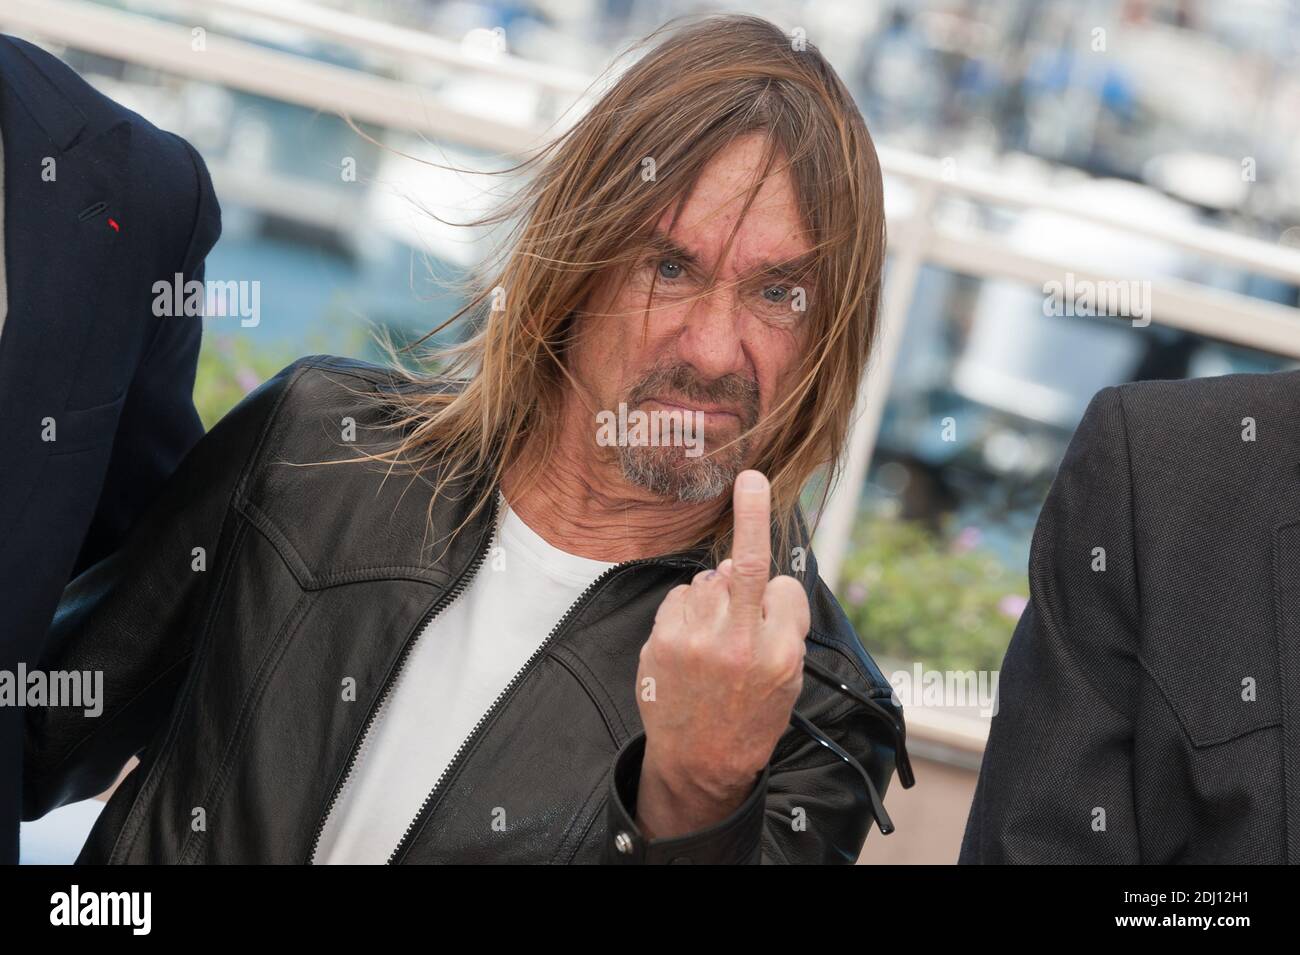 Iggy Pop at a photocall for the film 'Gimme Danger' as part of the 69th Cannes International Film Festival, at the Palais des Festivals in Cannes, southern France on May 19, 2016. Photo by Nicolas Genin/ABACAPRESS.COM Stock Photo